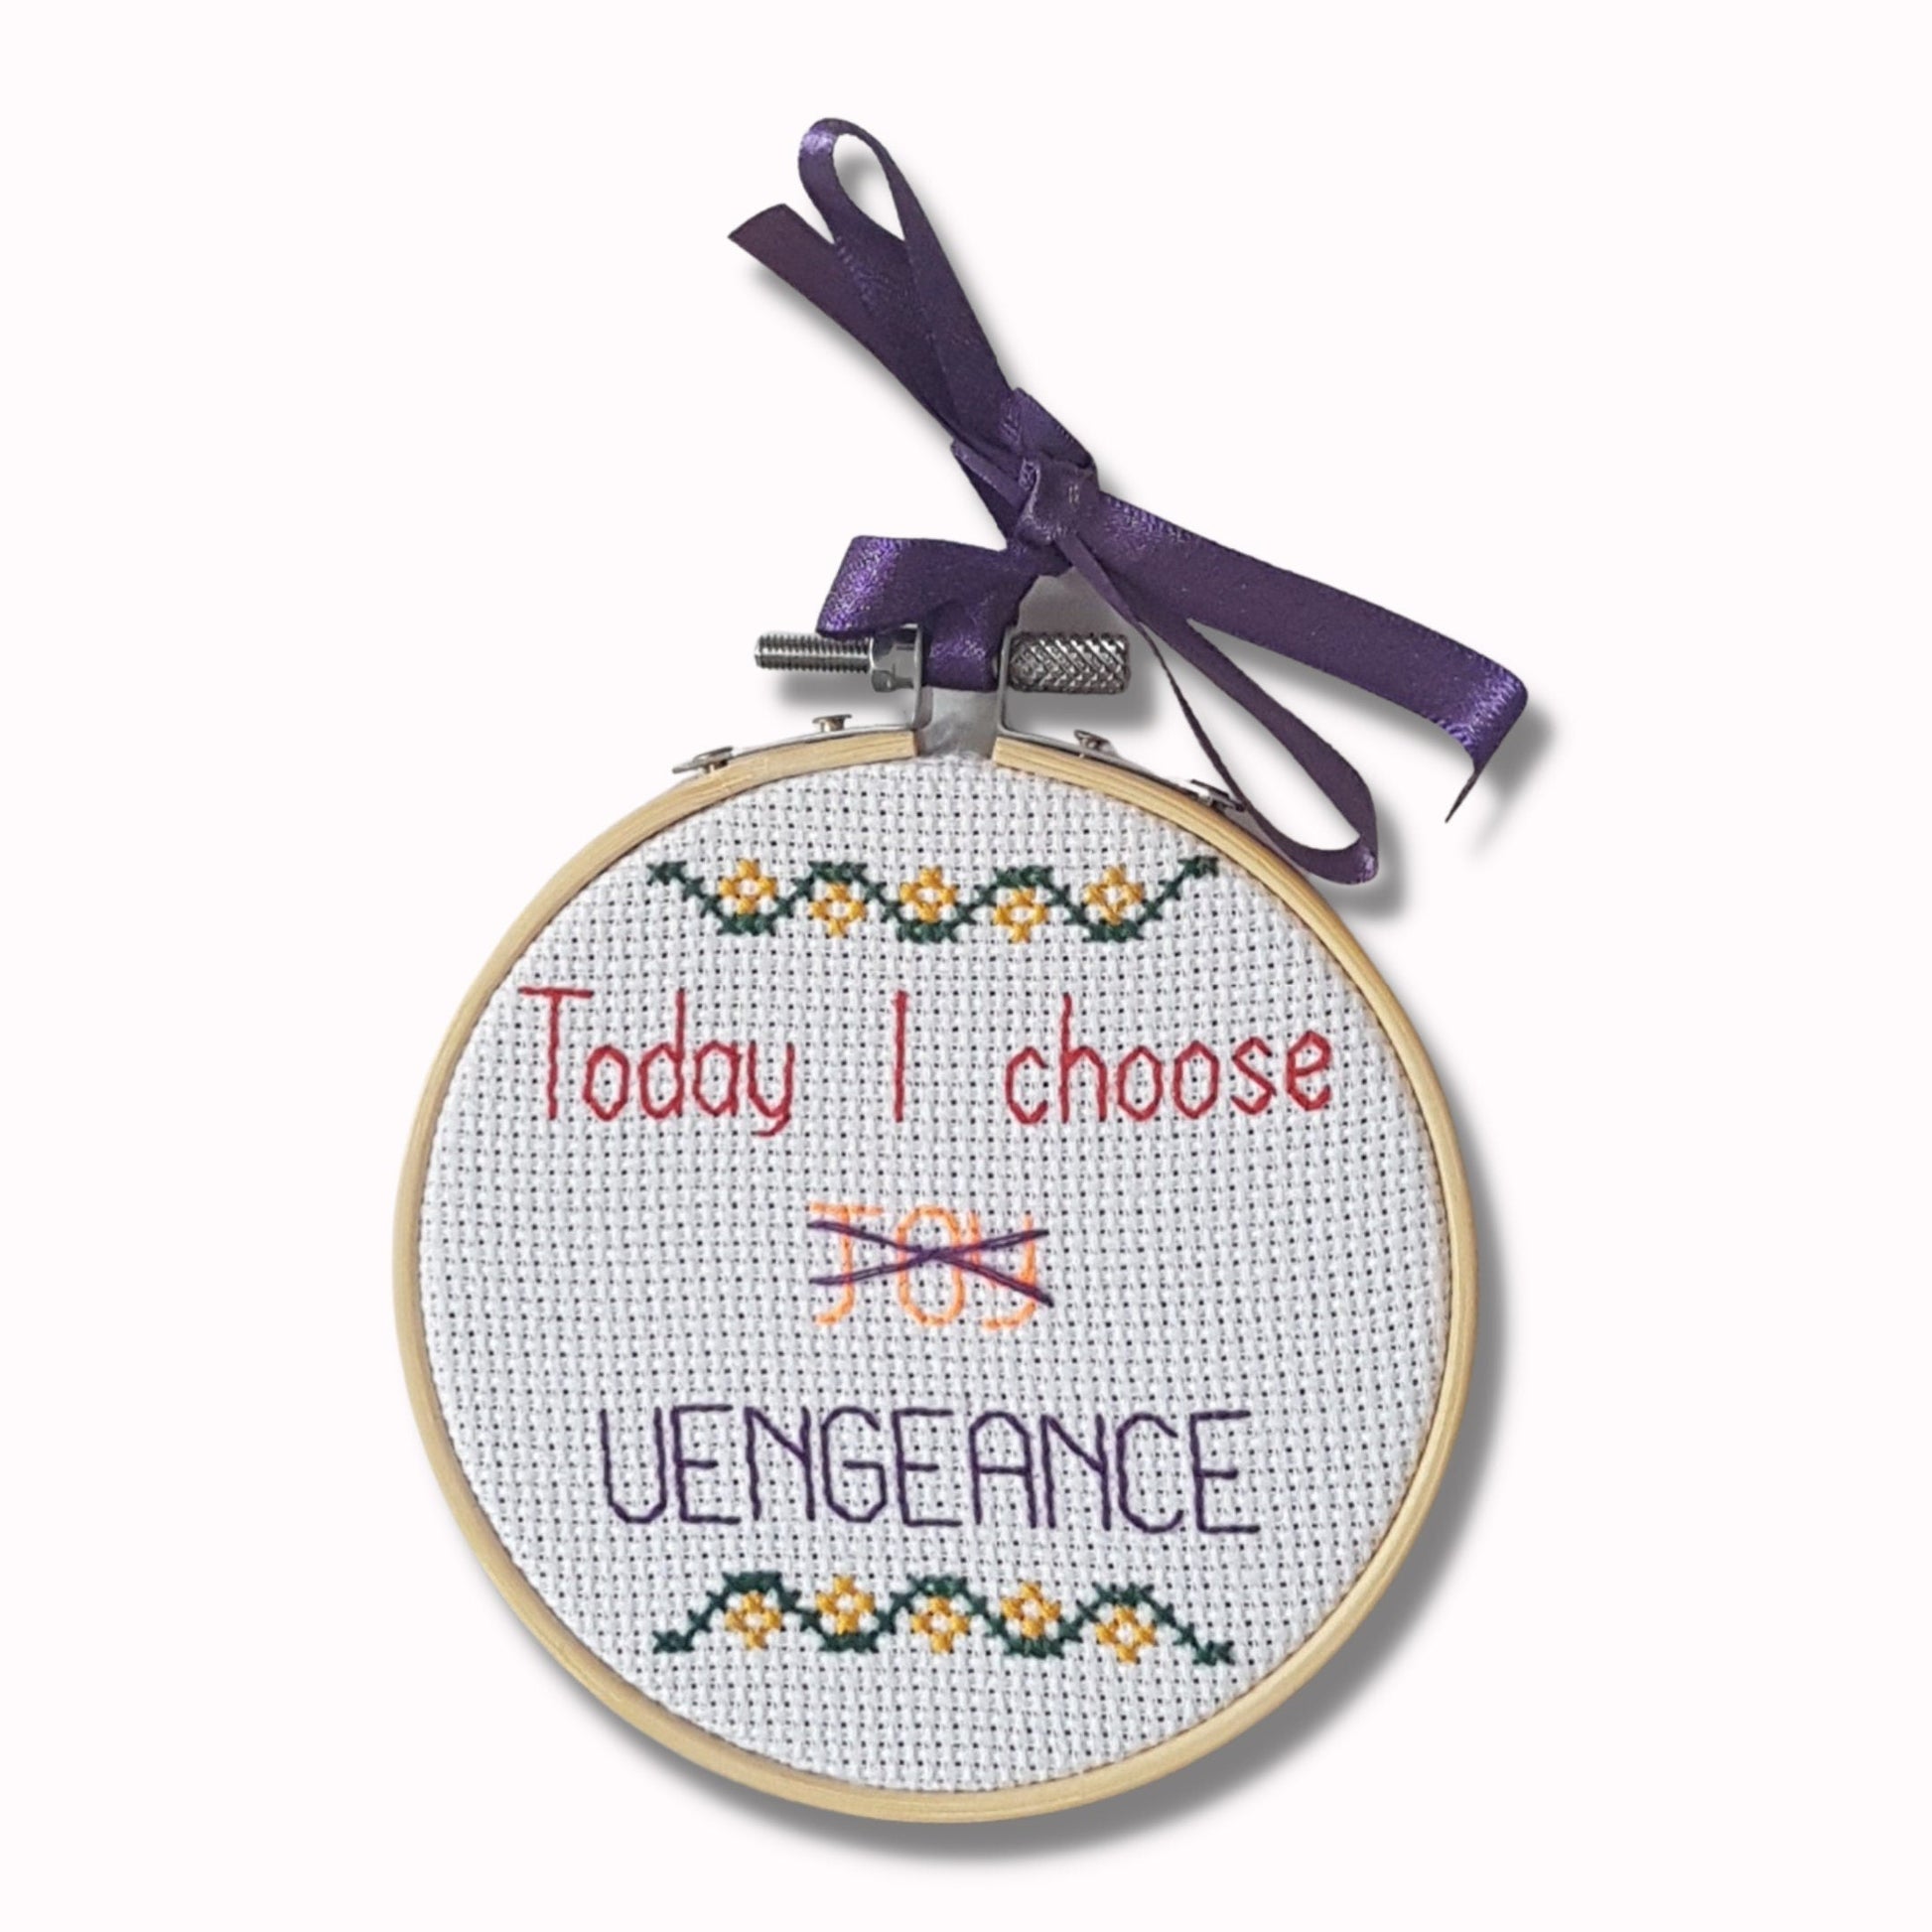 Today I choose vengeance, completed cross stitch quote - Thistleflat Crafts